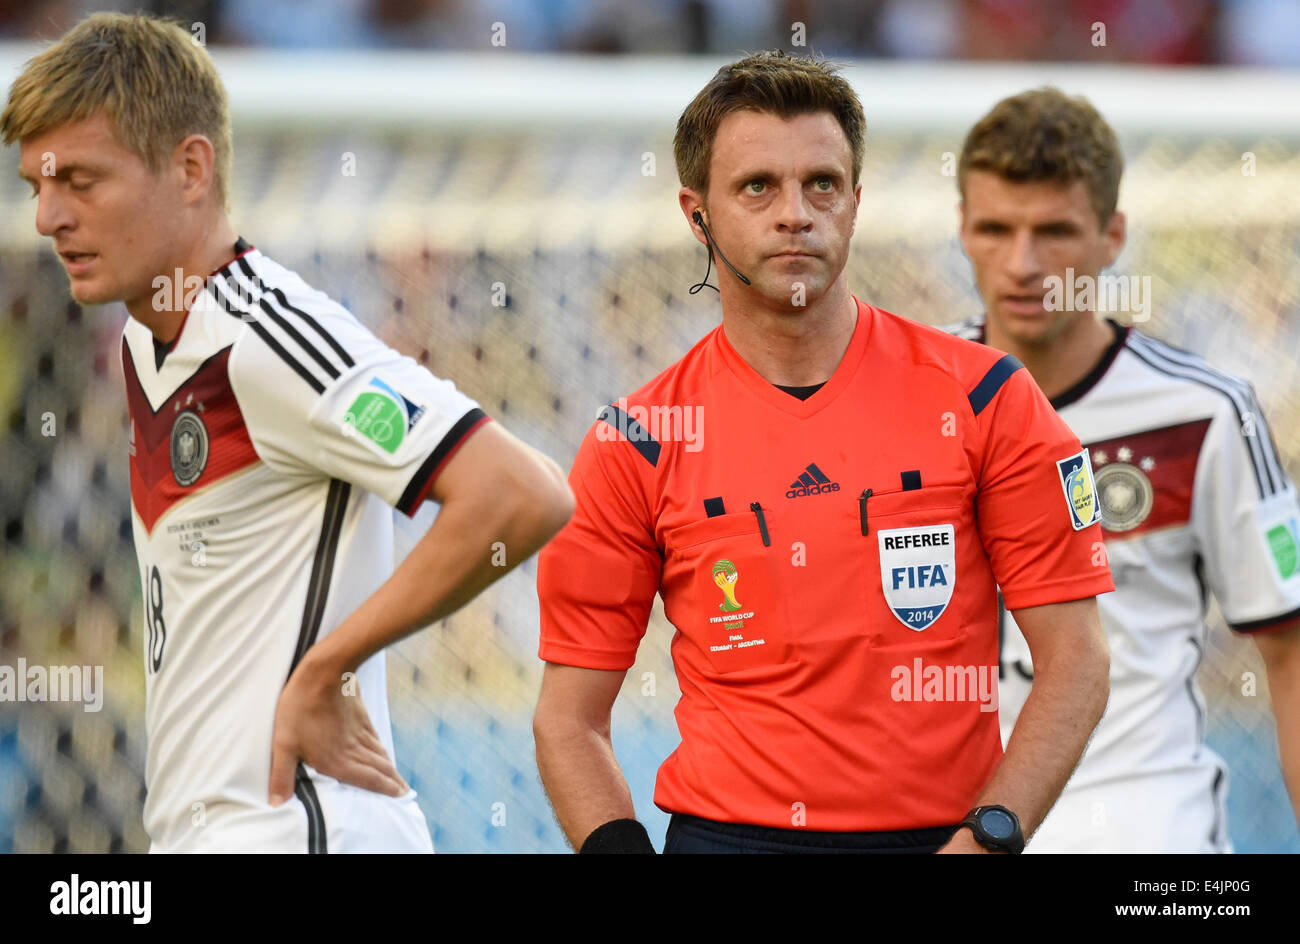 Rio de Janeiro, Brazil. 13th July, 2014. Toni Kroos (L) and Thomas Mueller (R) of Germany stand next to Italian referee Nicola Rizzoli during the FIFA World Cup 2014 final soccer match between Germany and Argentina at the Estadio do Maracana in Rio de Janeiro, Brazil, 13 July 2014. Photo: Marcus Brandt/dpa/Alamy Live News Stock Photo